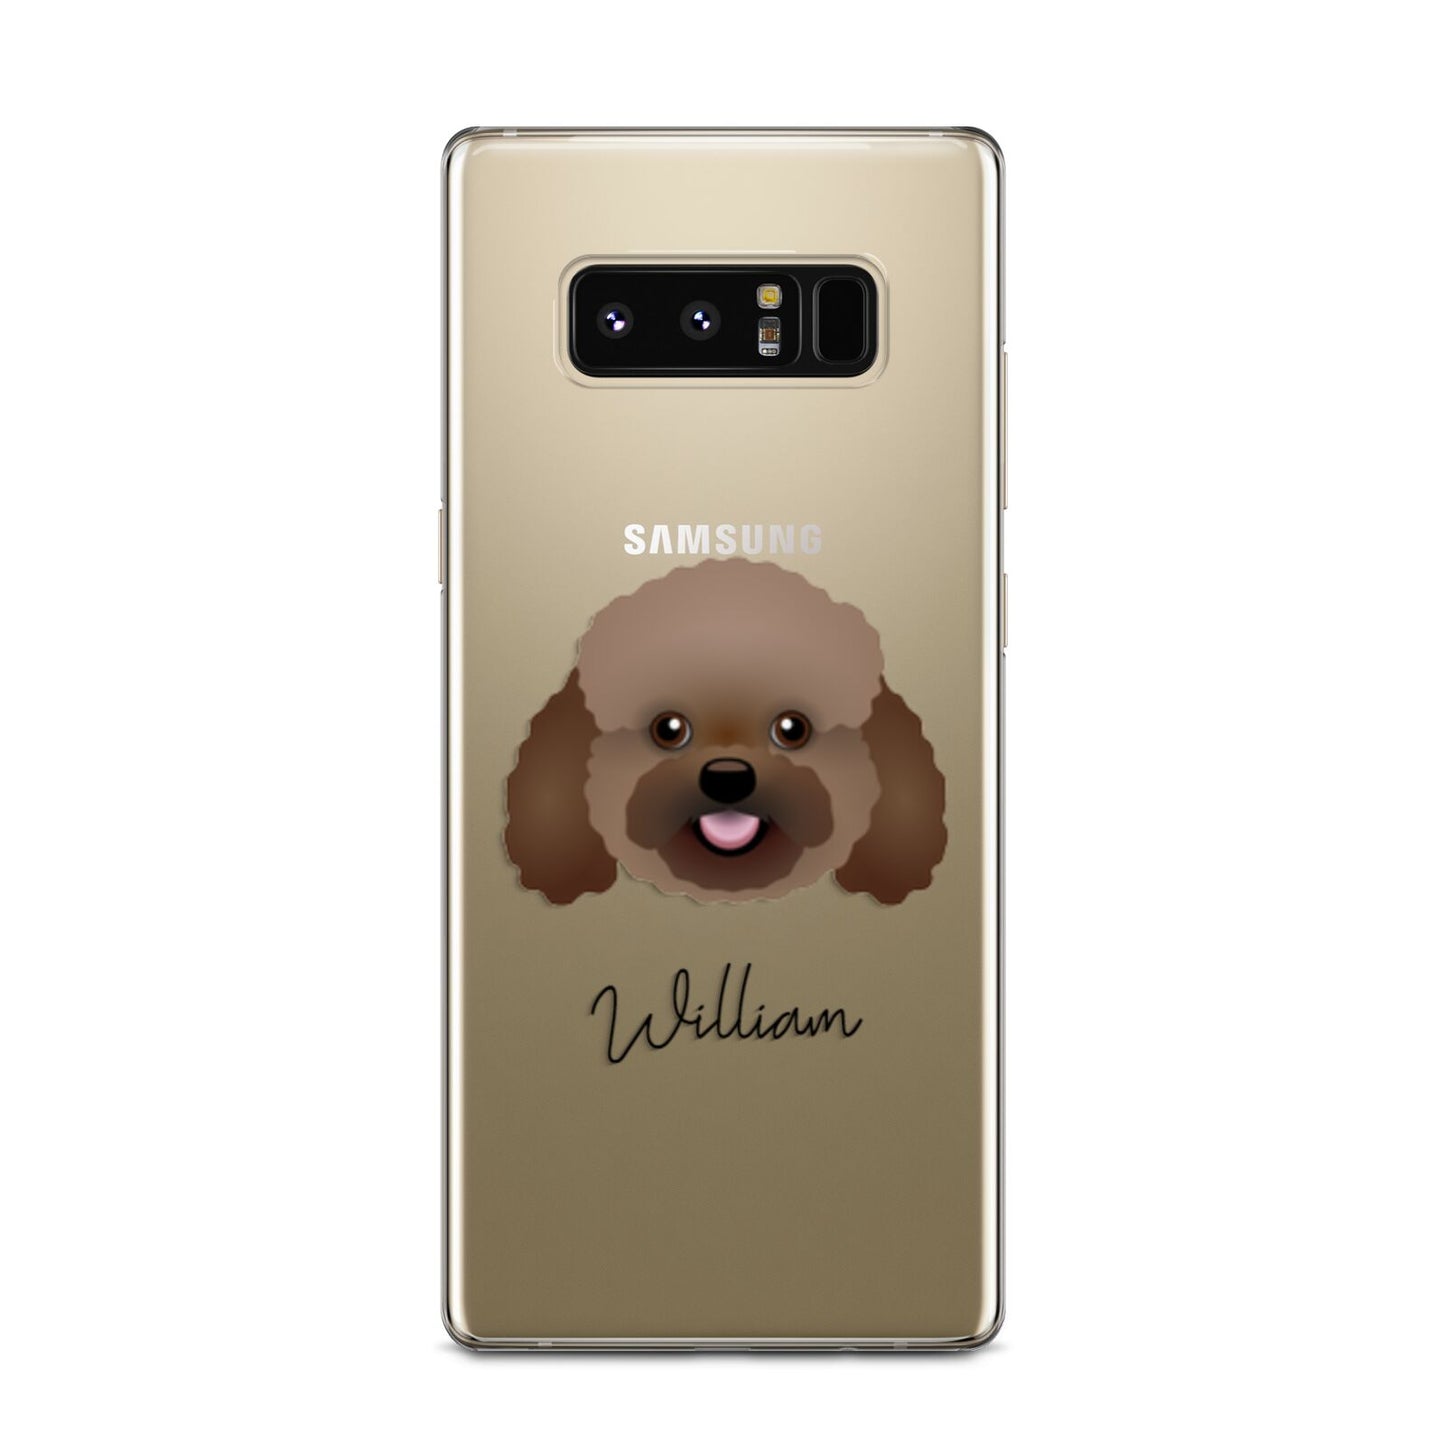 Bich poo Personalised Samsung Galaxy Note 8 Case